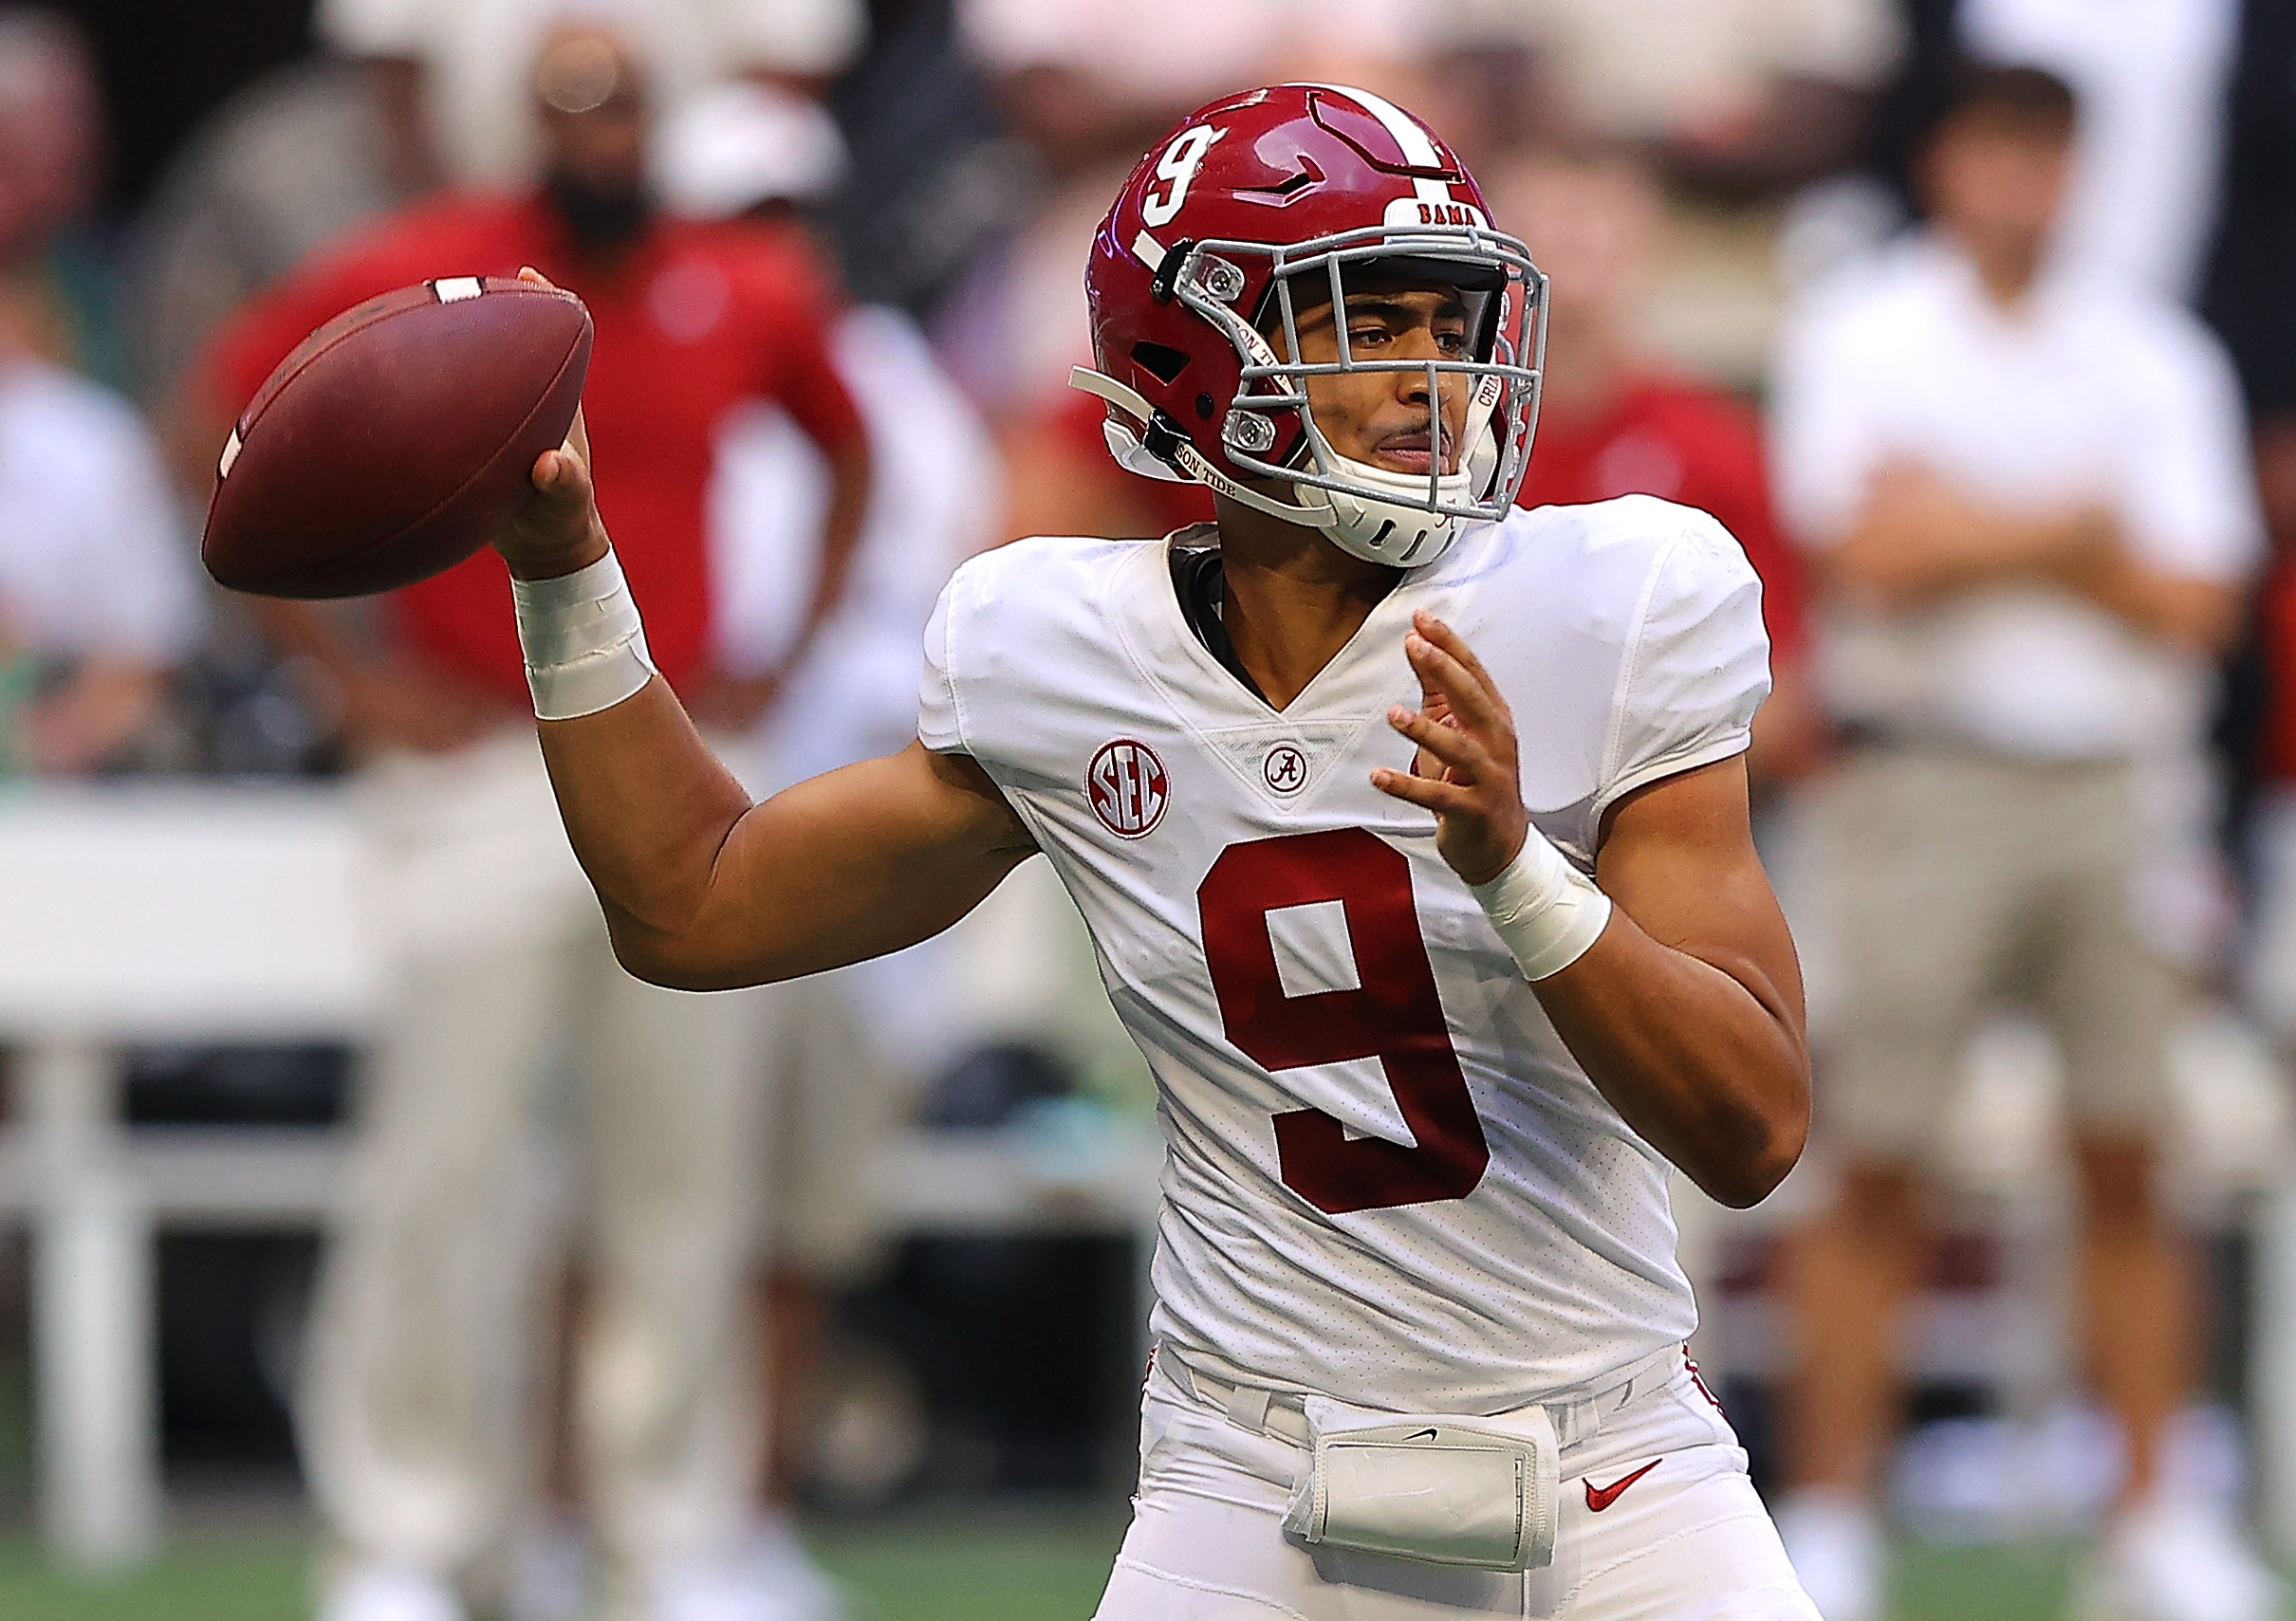 Alabama S Bryce Young To Host Podcast For Colin Cowherd S The Volume In Nil Deal Bleacher Report Latest News Videos And Highlights